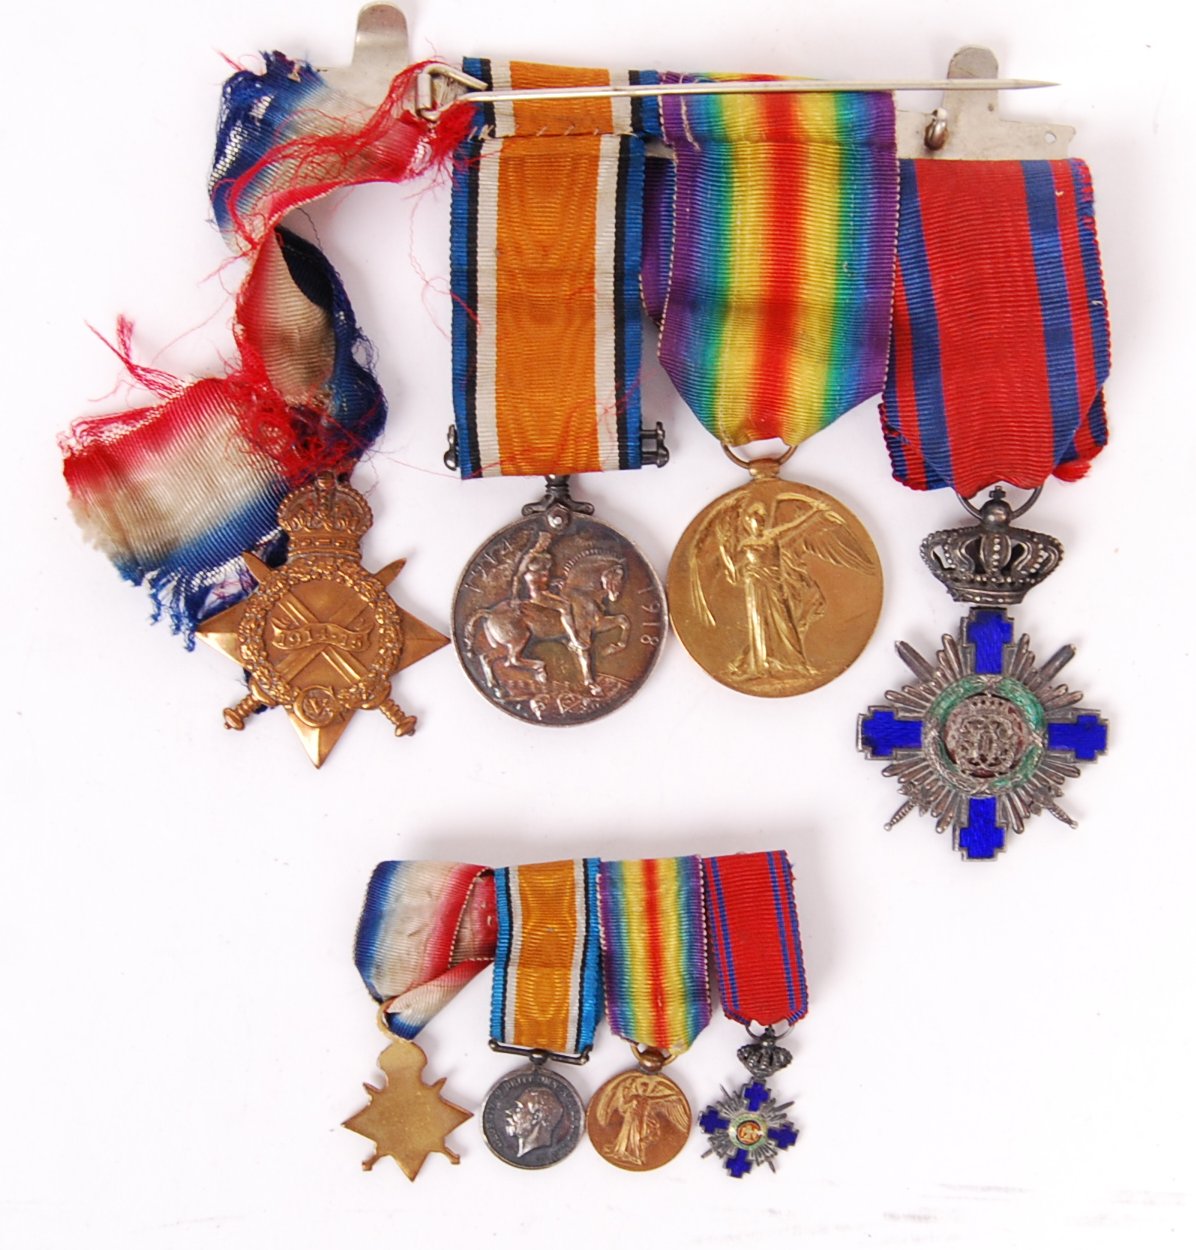 WWI FIRST WORLD WAR MEDAL GROUP - ORDER OF THE STAR OF ROMANIA